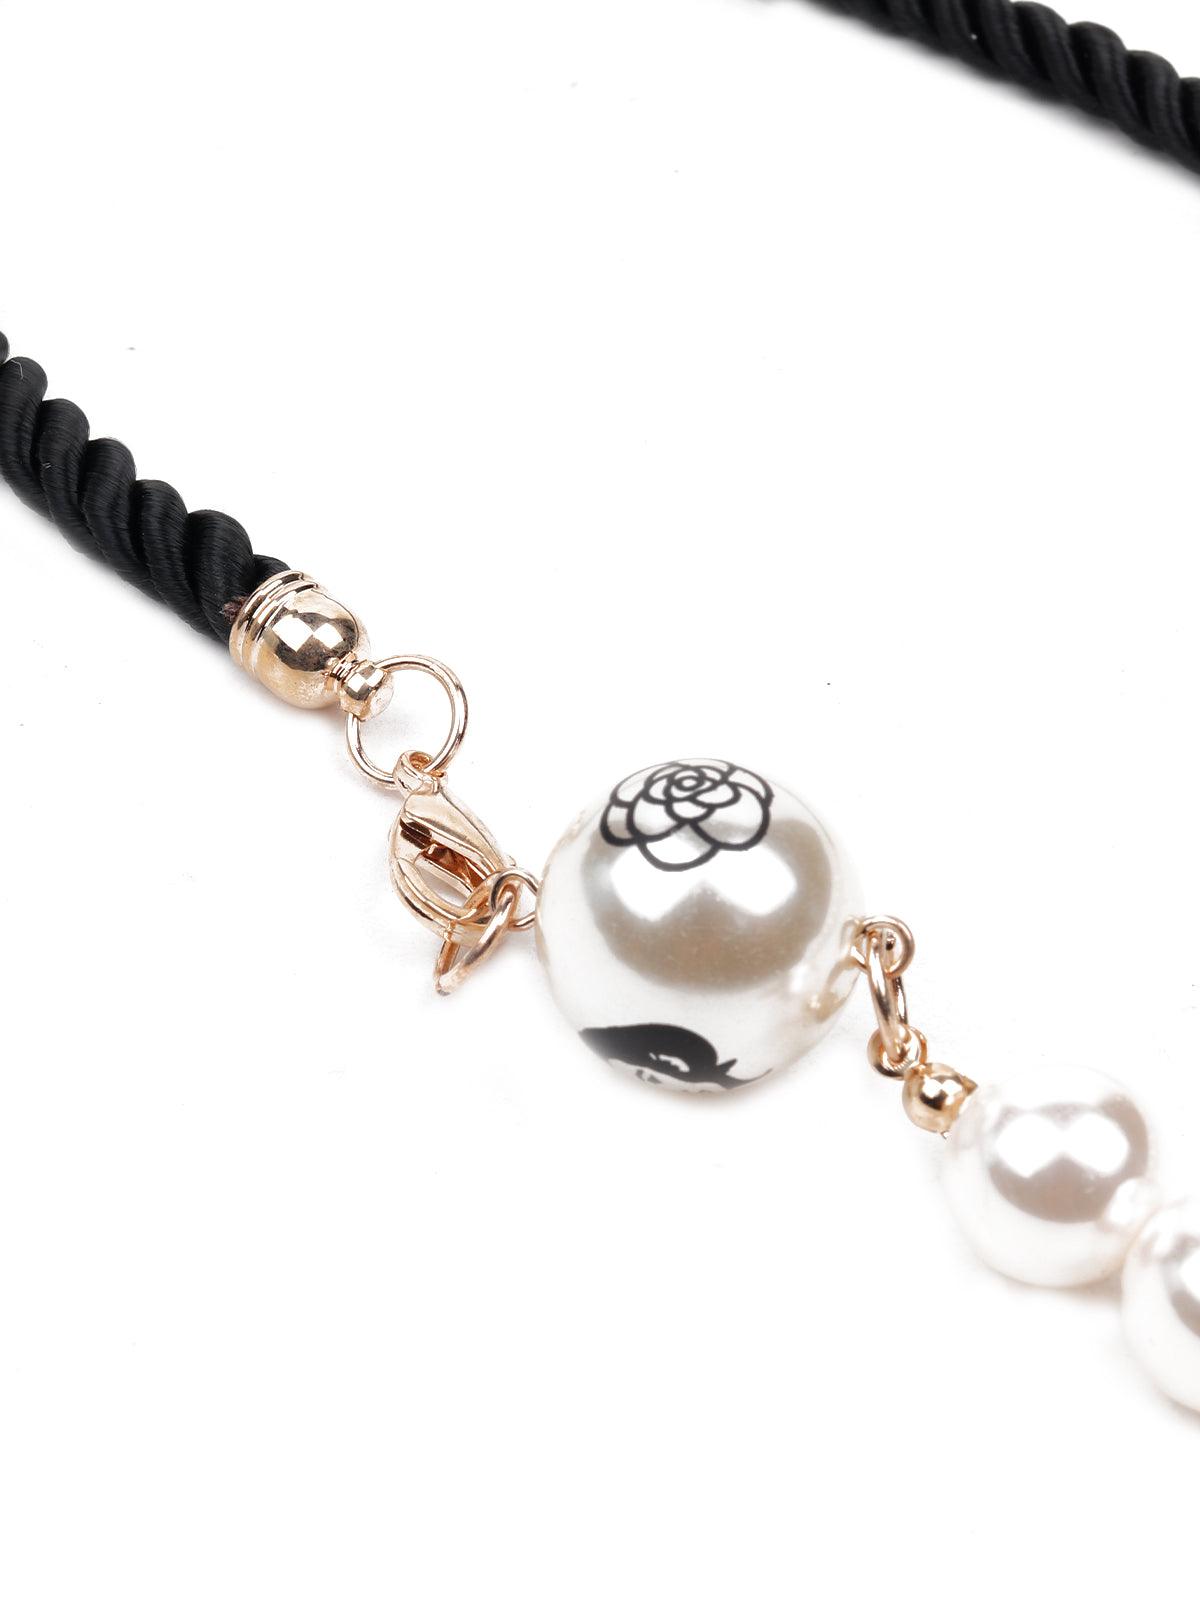 Women's Pearl Necklace Embellished With Charms - Odette